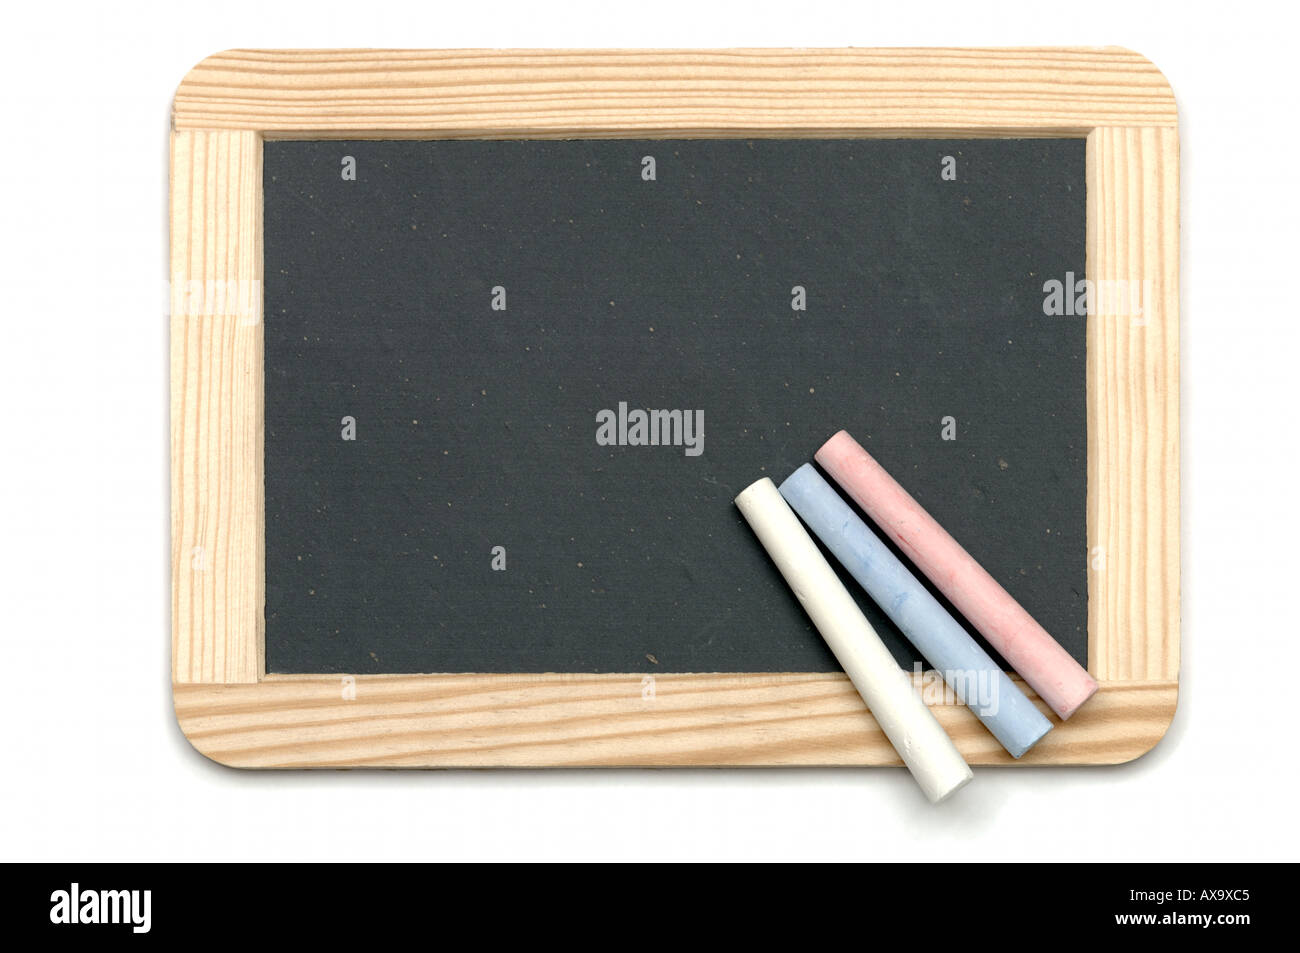 Chalk sticks on blank writing traditional slate in wooden frame on white background Stock Photo